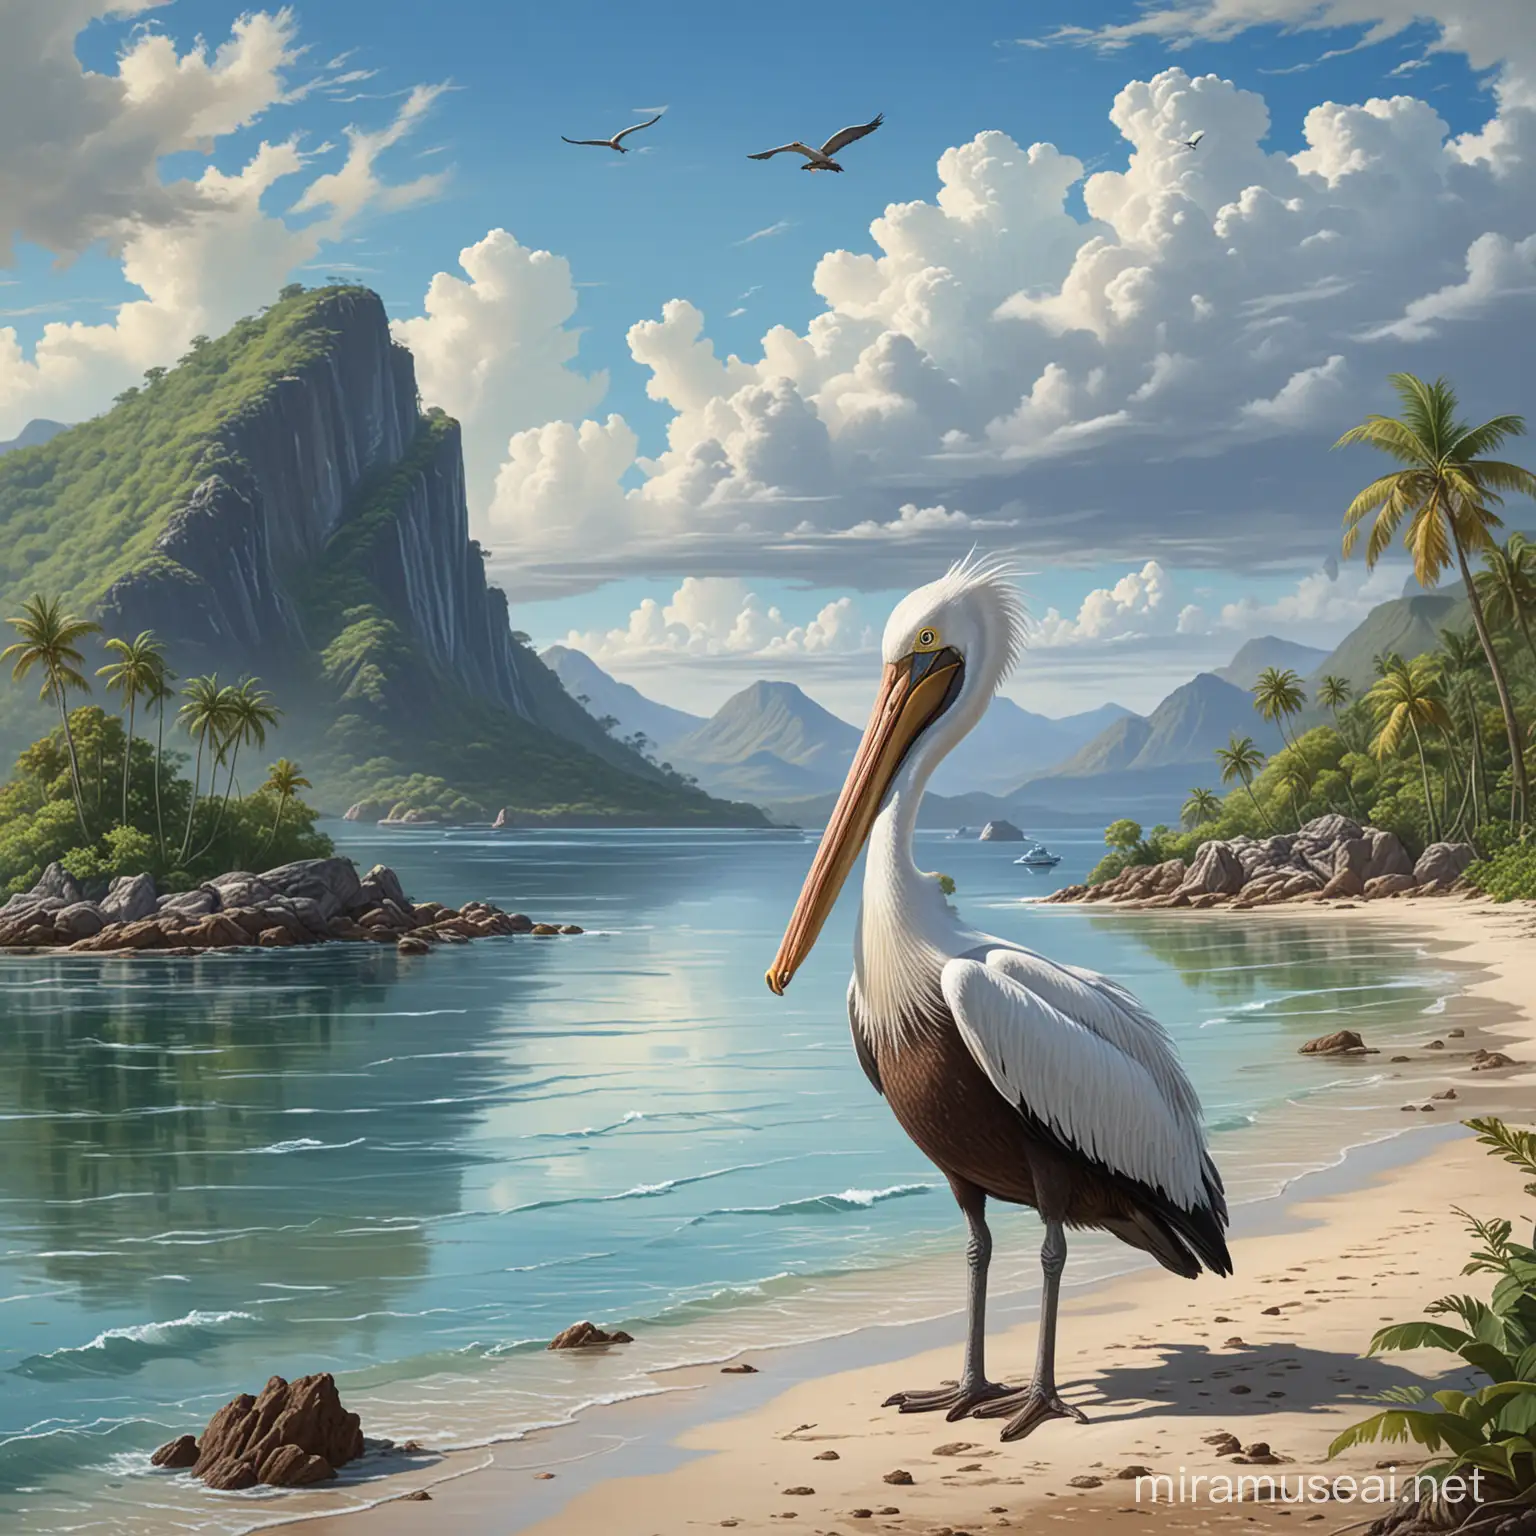 The image shows a bird with a long beak, specifically a pelican.The image shows a small island with a mountain in the background. The landscape features water, a beach, and a clear blue sky with clouds. It depicts a tropical coastal scene with a mountainous backdrop.